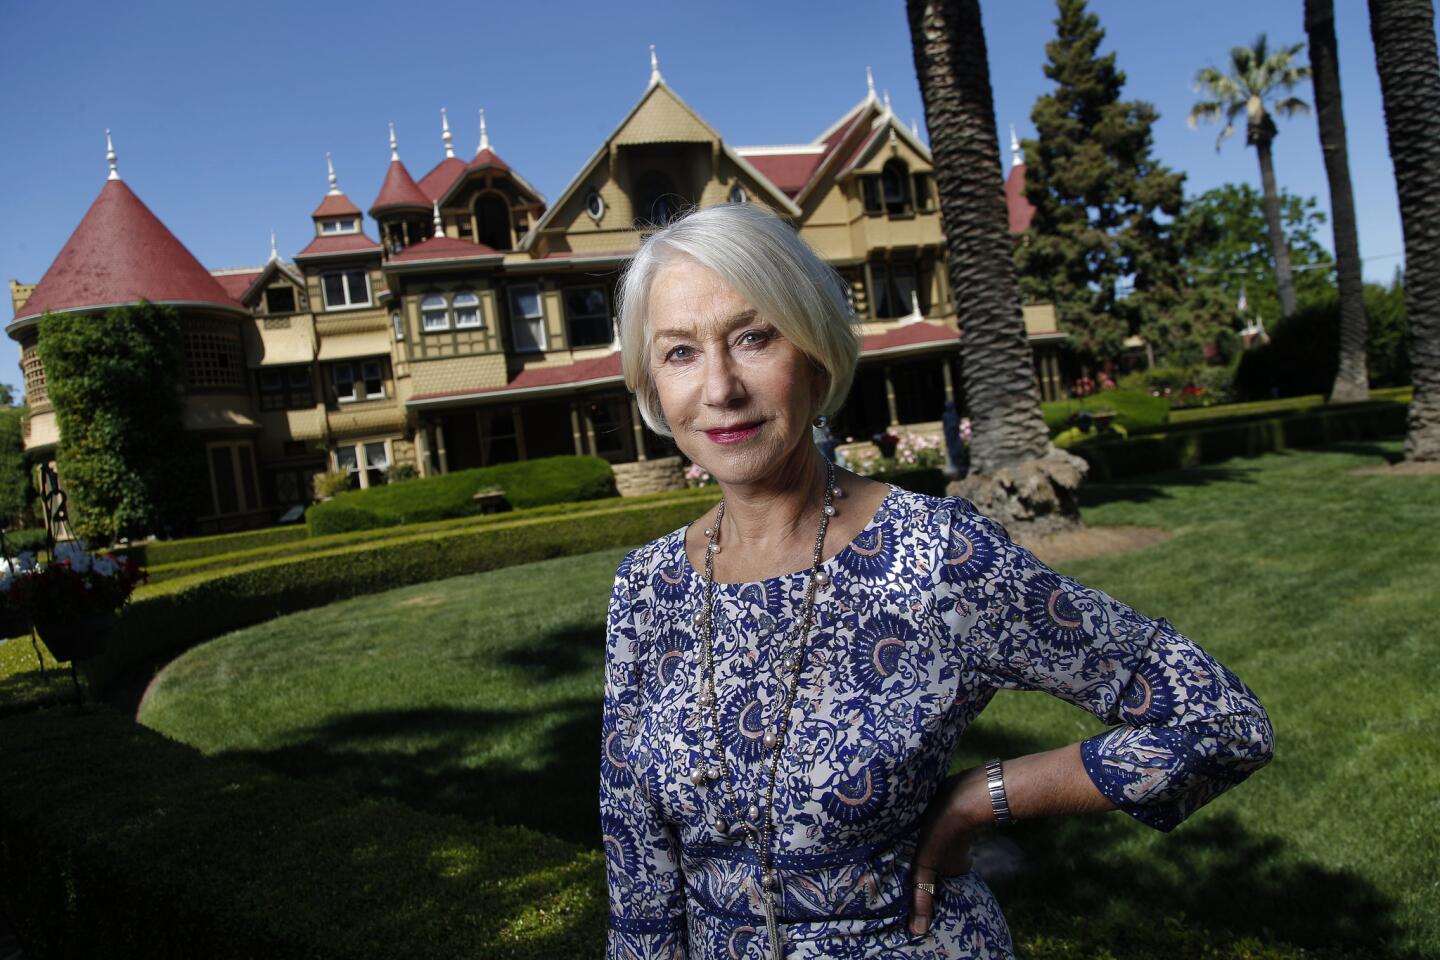 The Winchester Mystery House in San Jose is the subject of a movie starring Helen Mirren.